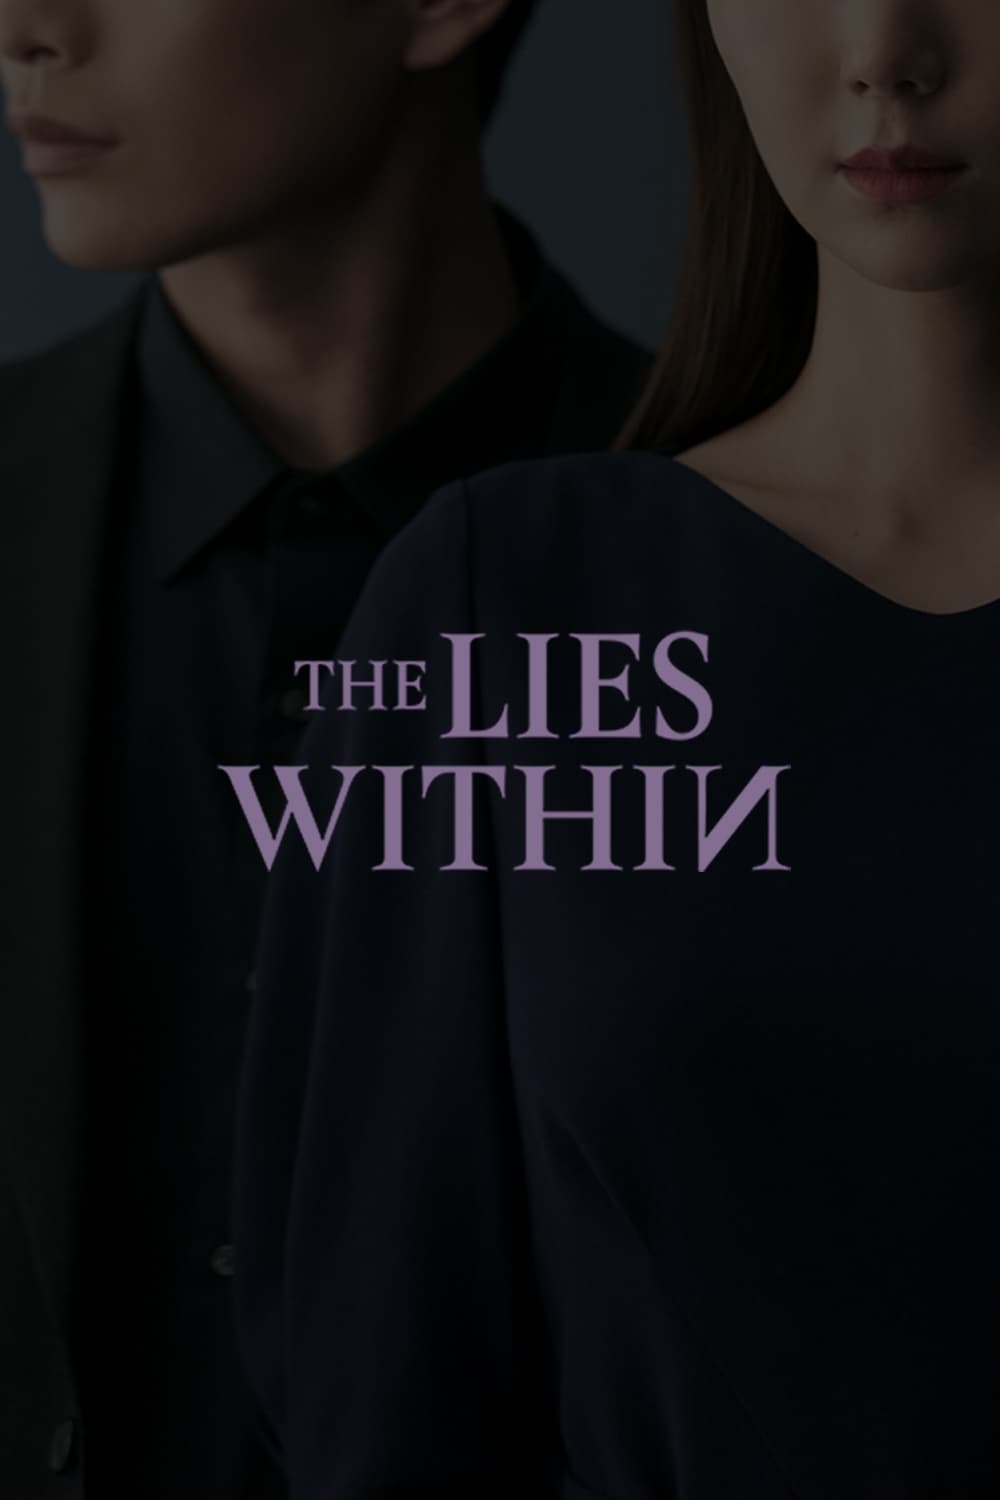 The Lies Within